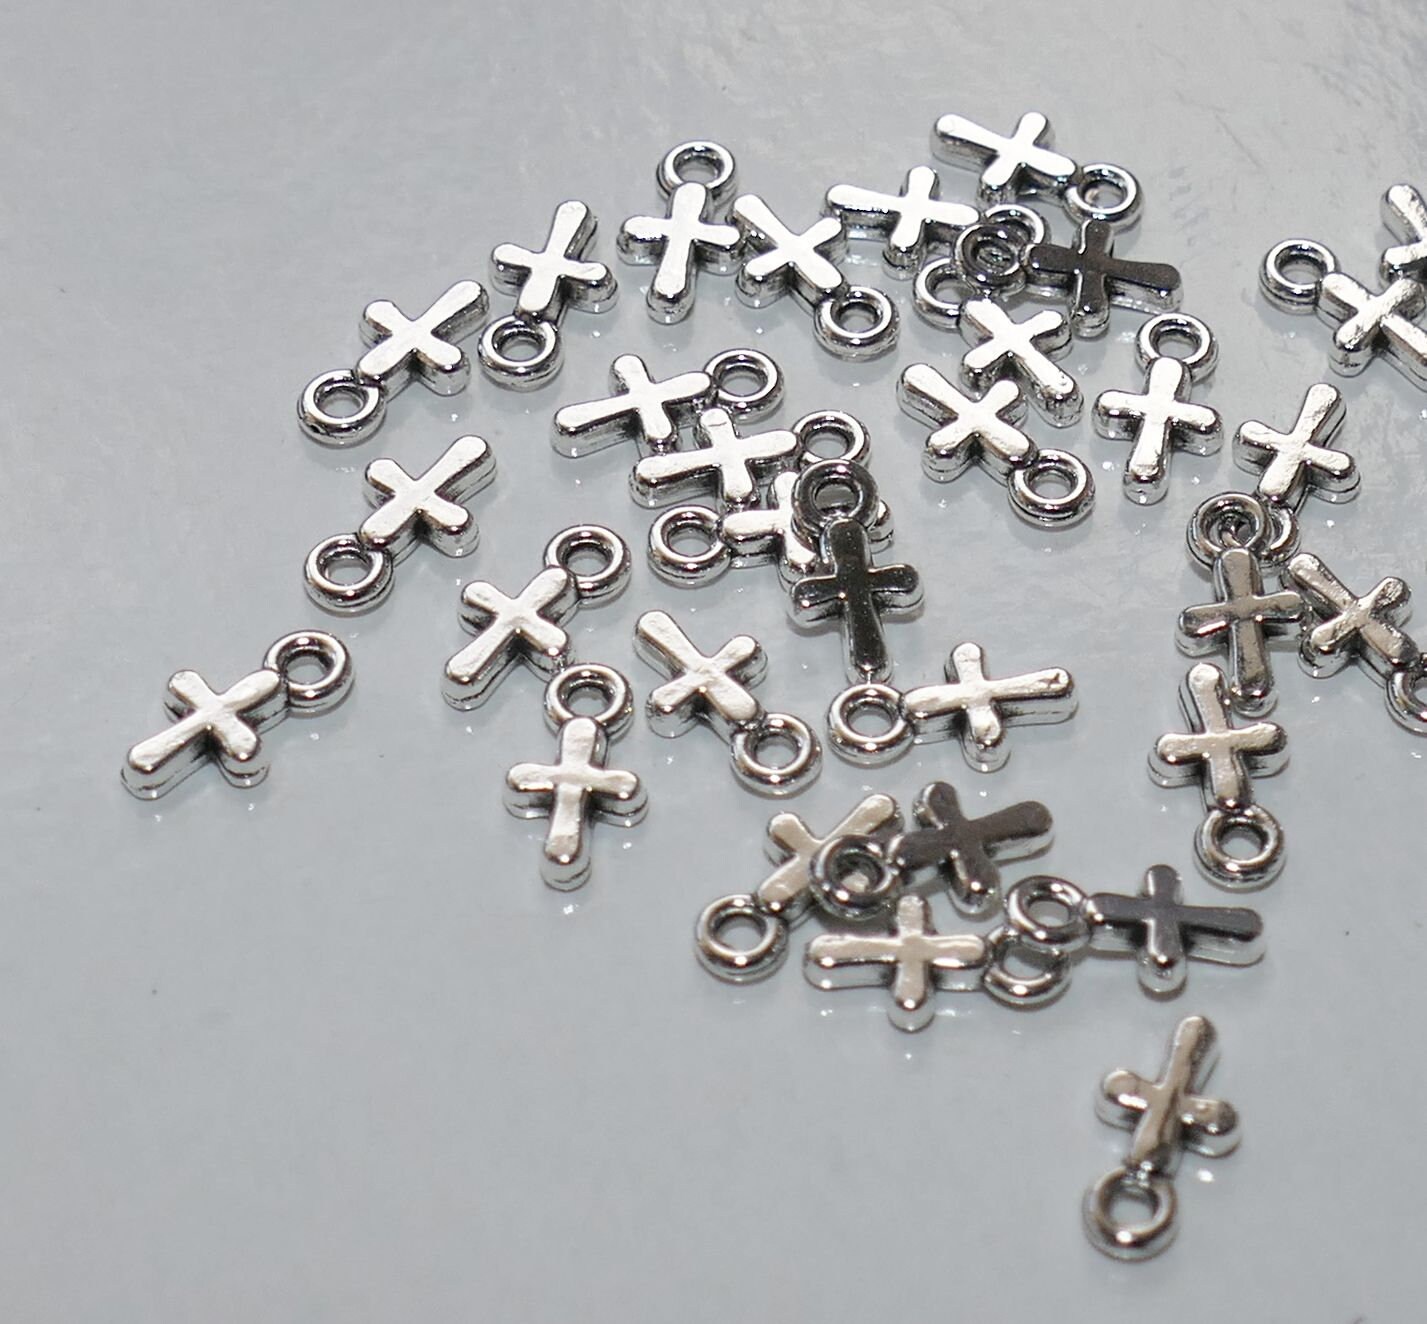 10x Small Cross Charms for Necklaces Religious Pendant Earring